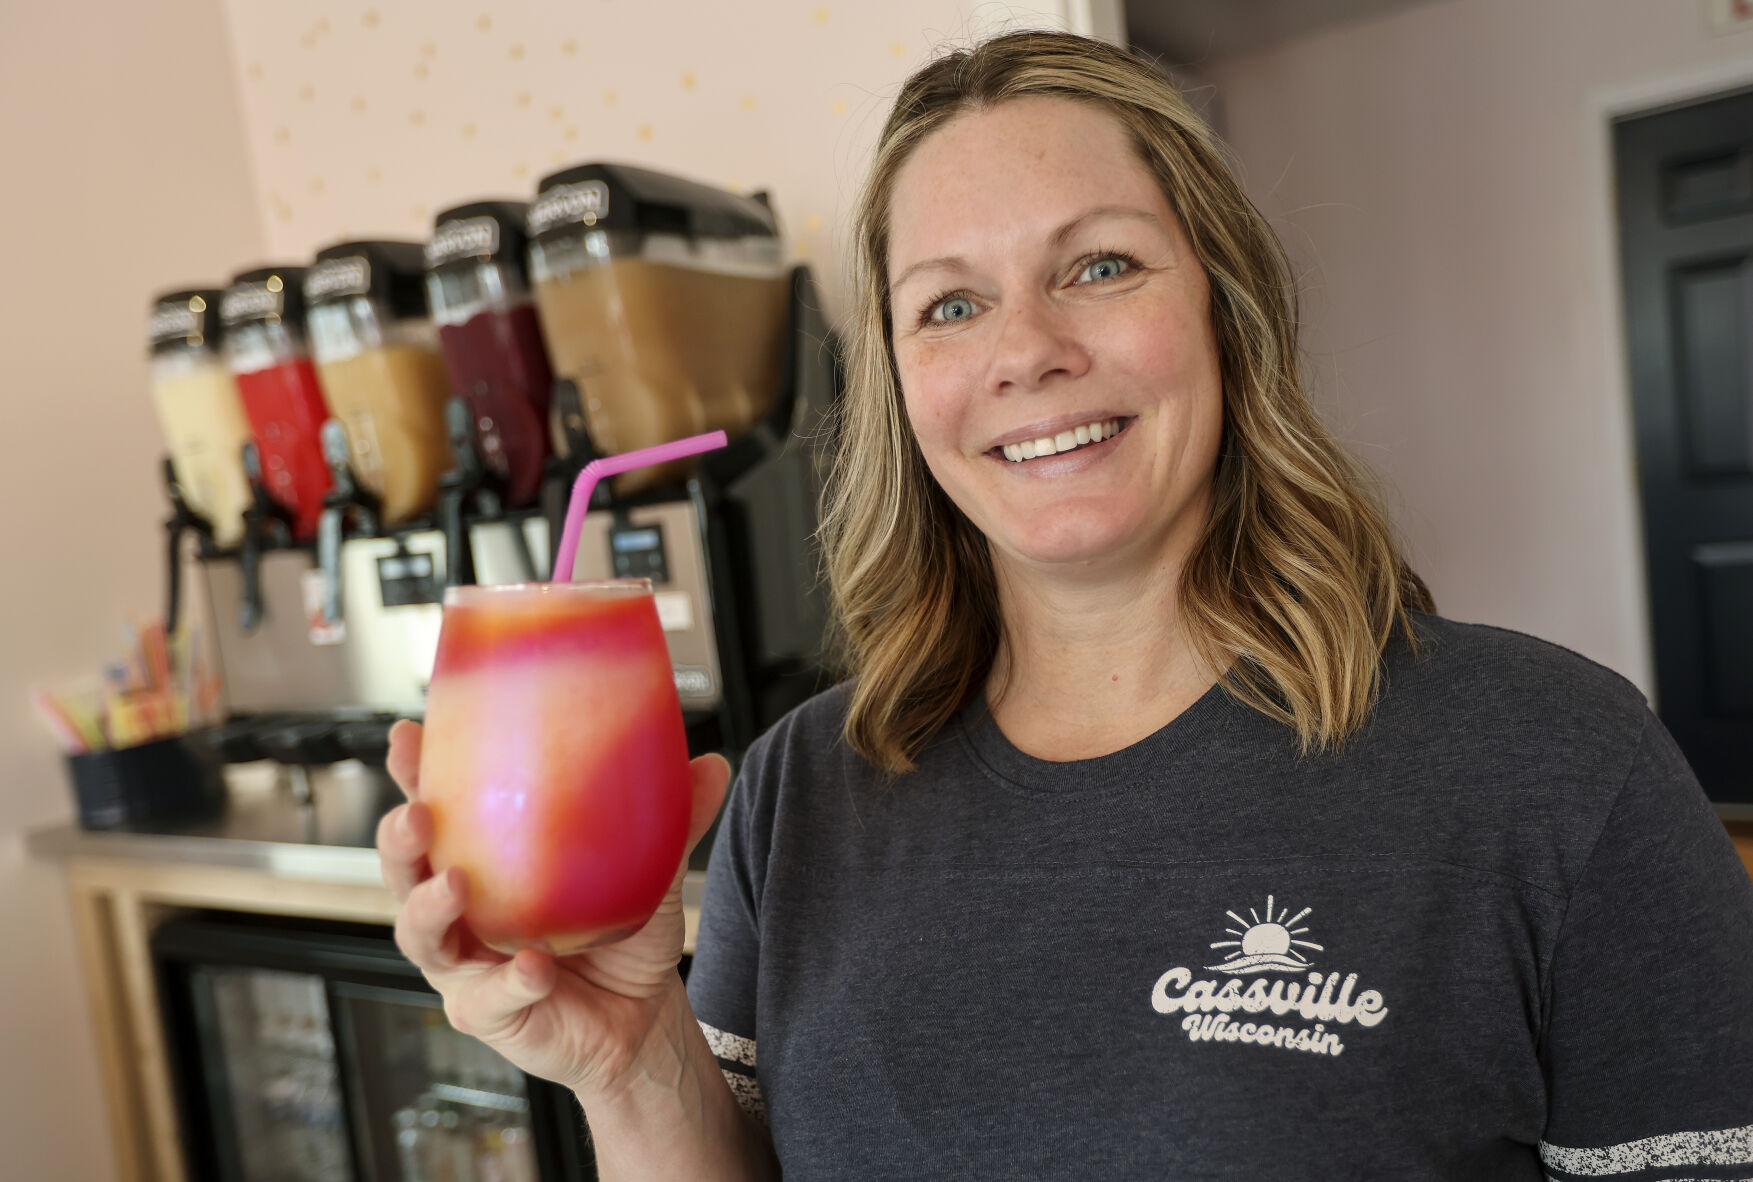 Owner of The Neighborhood Slush Carrie Wunderlin holds one of her wine slush drinks at her business located in Cassville, Wis., on Thursday, June 15, 2023.    PHOTO CREDIT: Dave Kettering